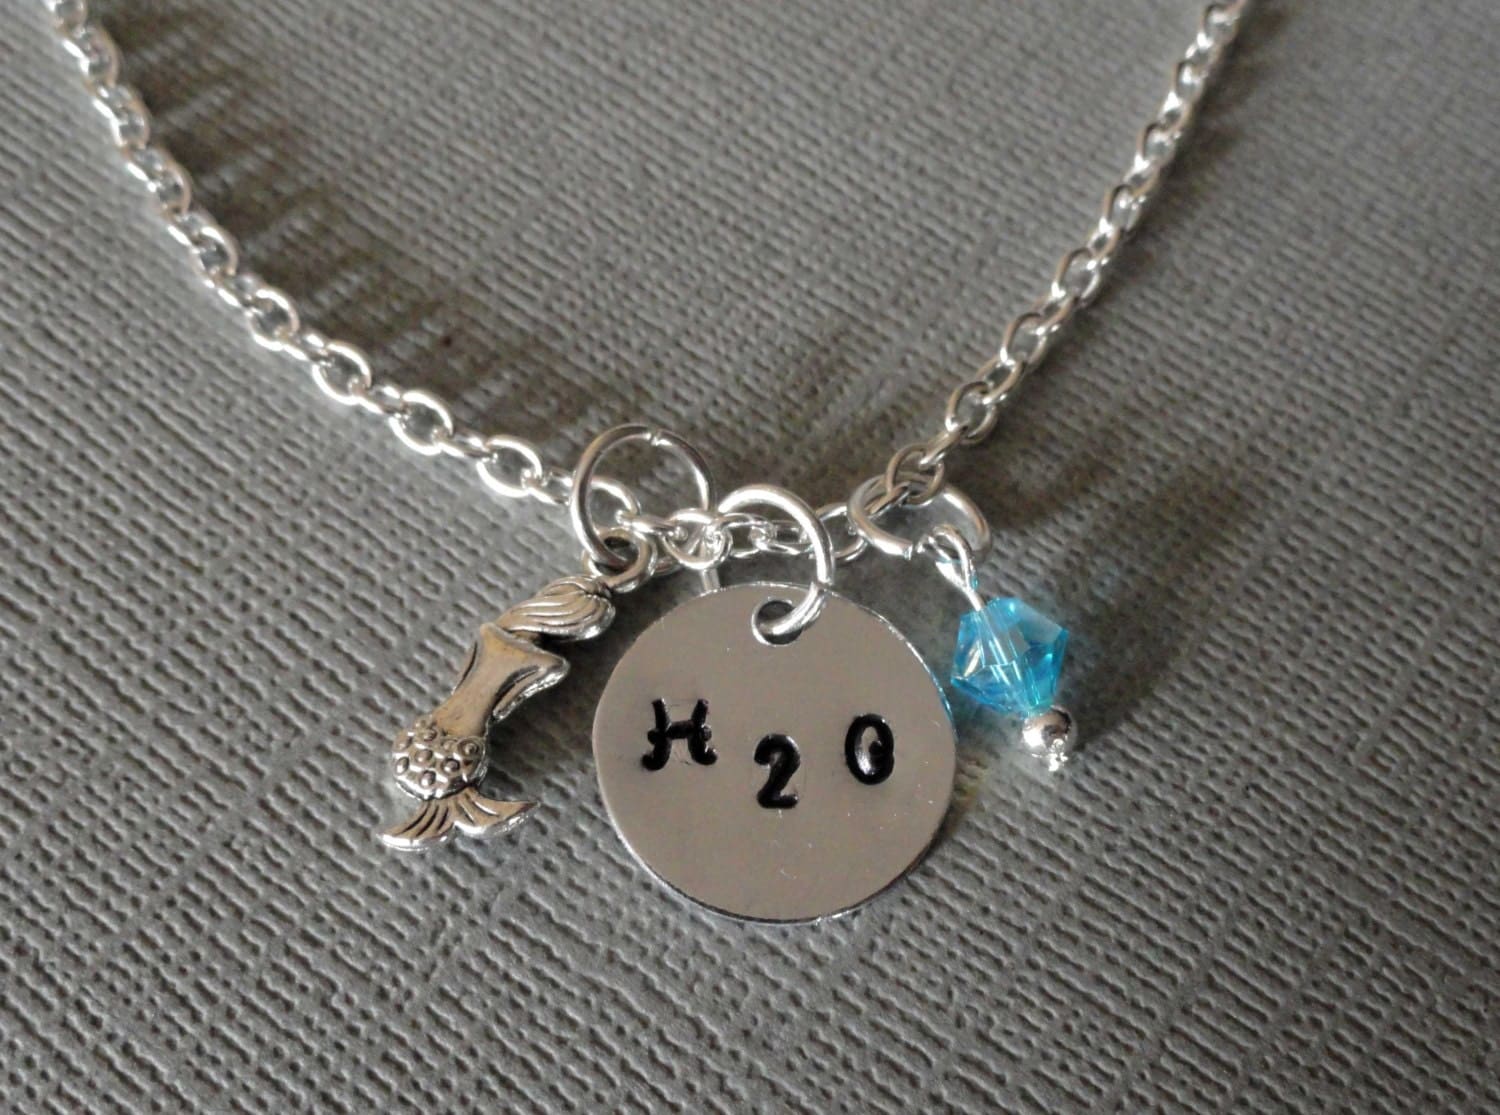 H2O necklace-H2O Just add water inspired necklace-H2O